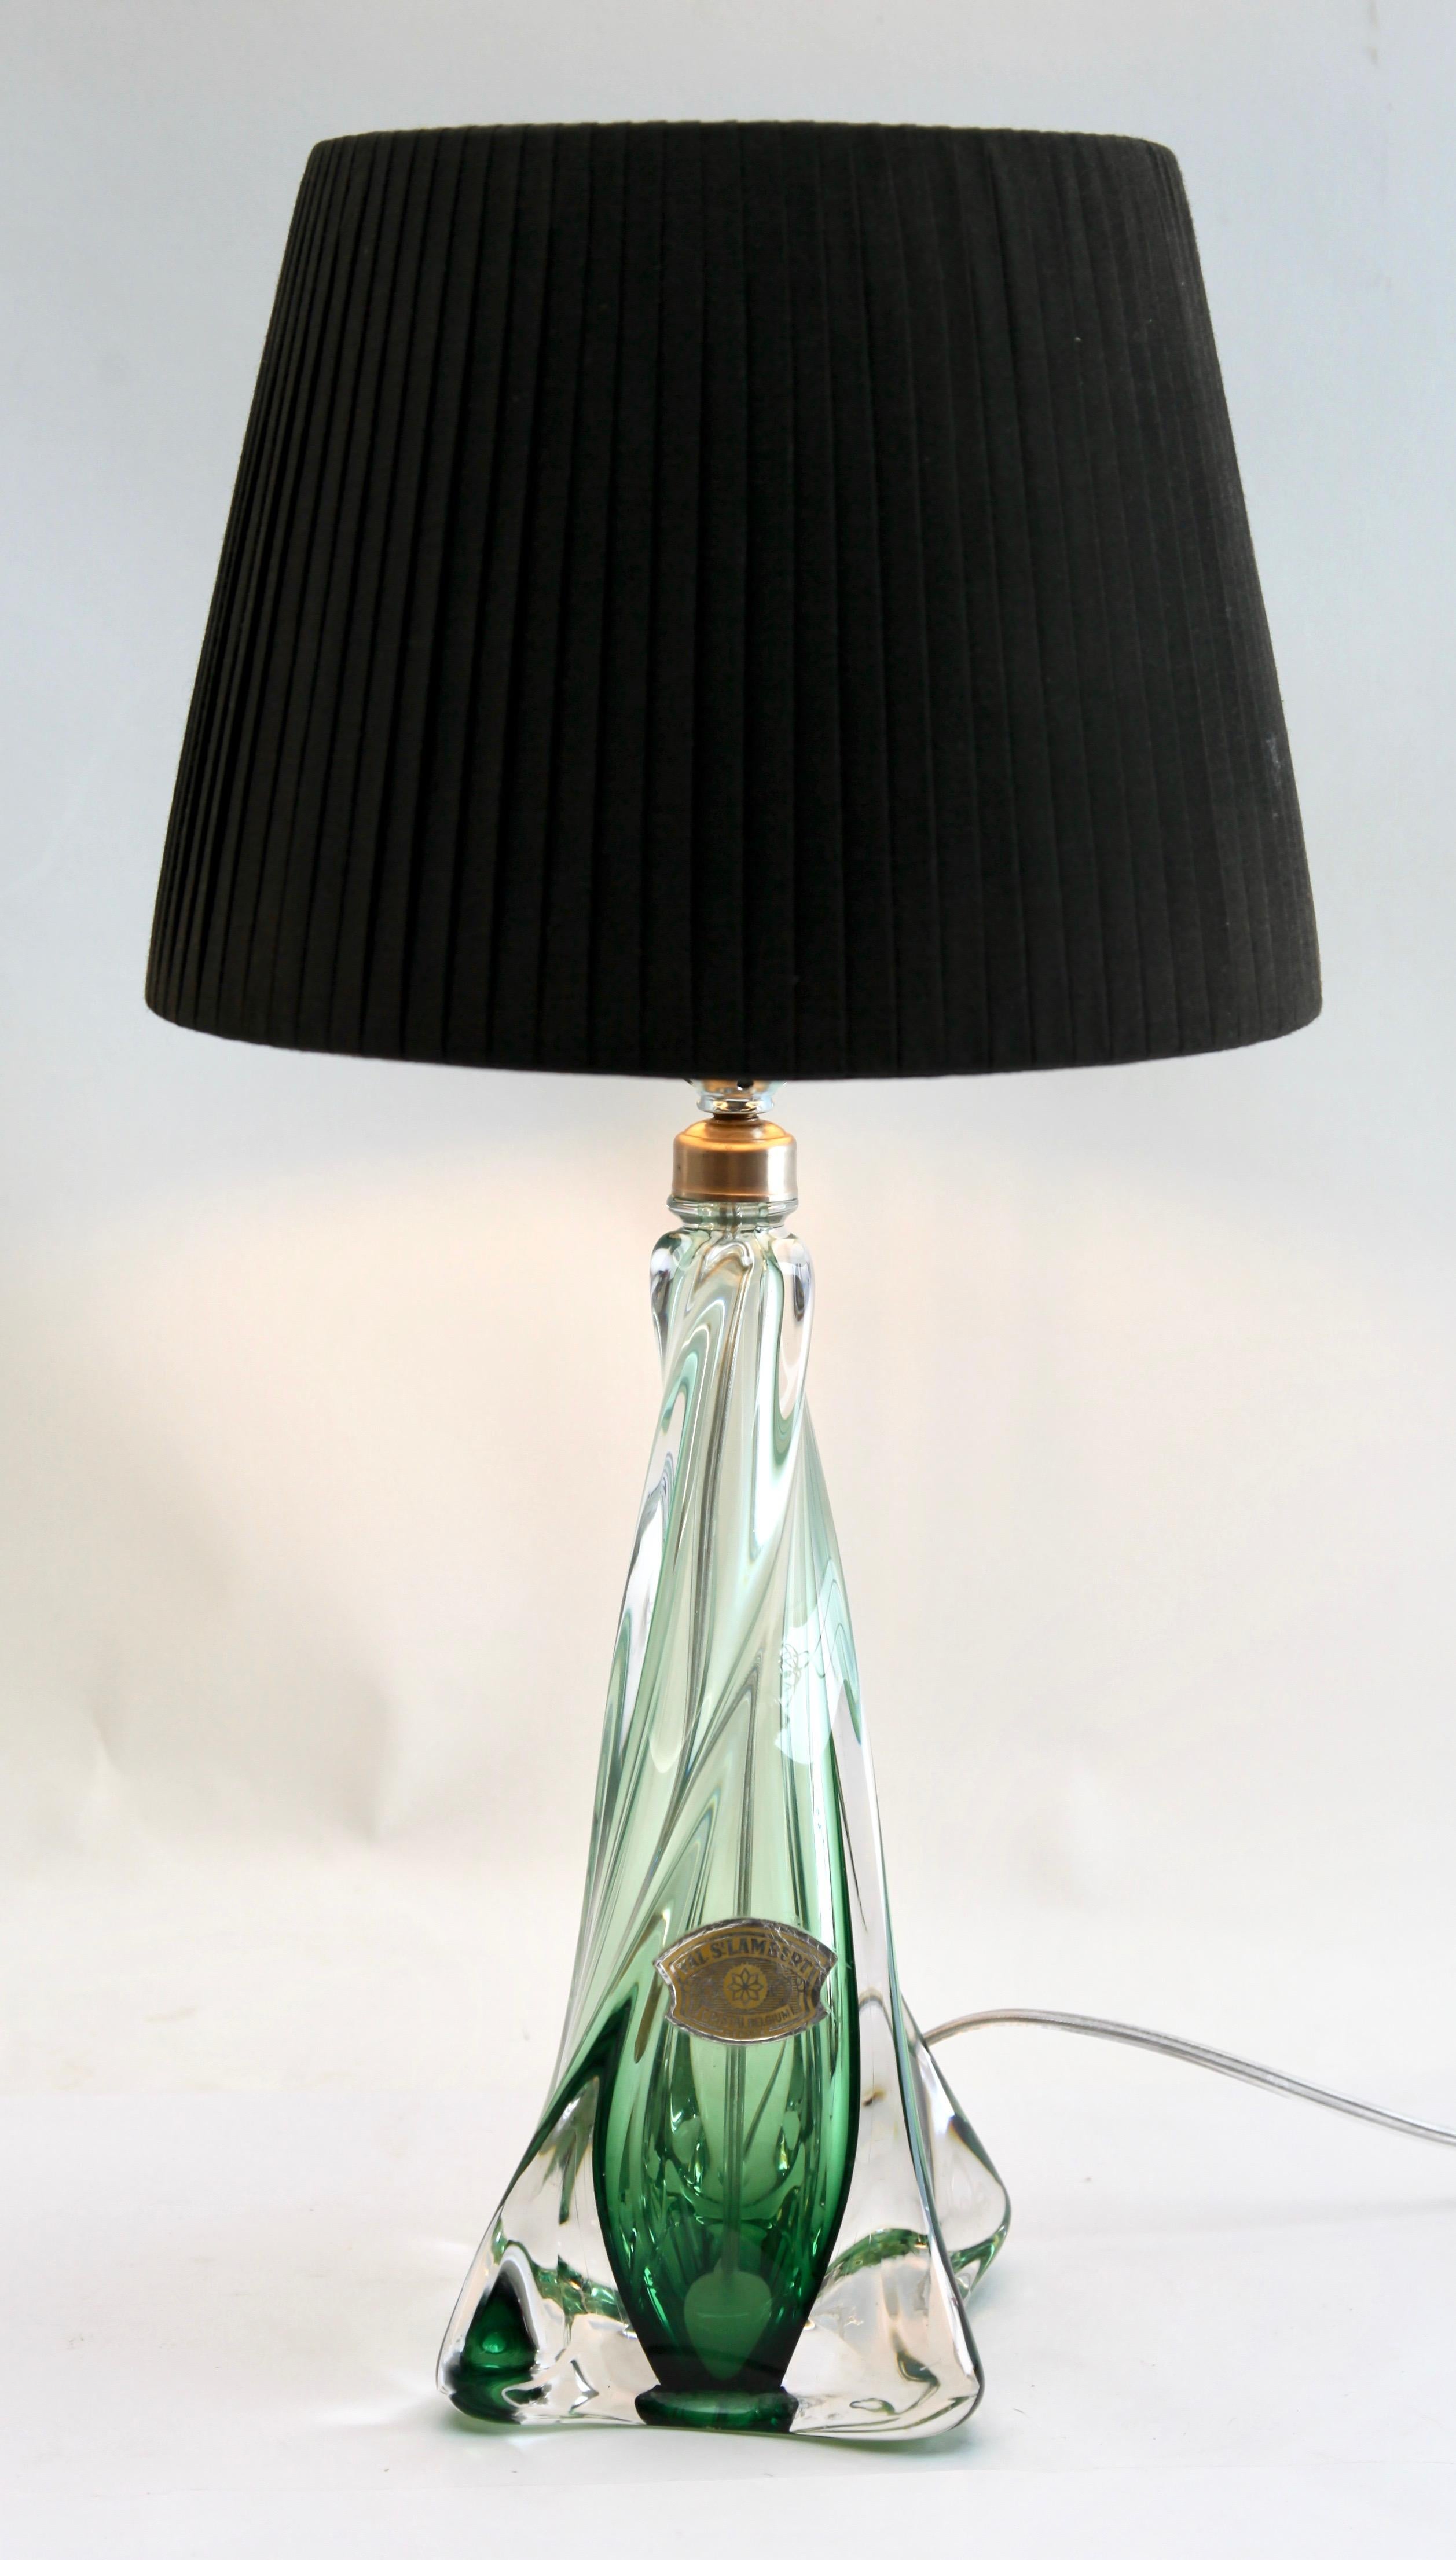 Signed and label
This simple yet graceful green table lamp is in medium size; 13 inches excluding the lamp-fitting and shade. The colored core in Classic Val Saint Lambert tint, has been given a thick Sommerso (clear crystal casing) so that the